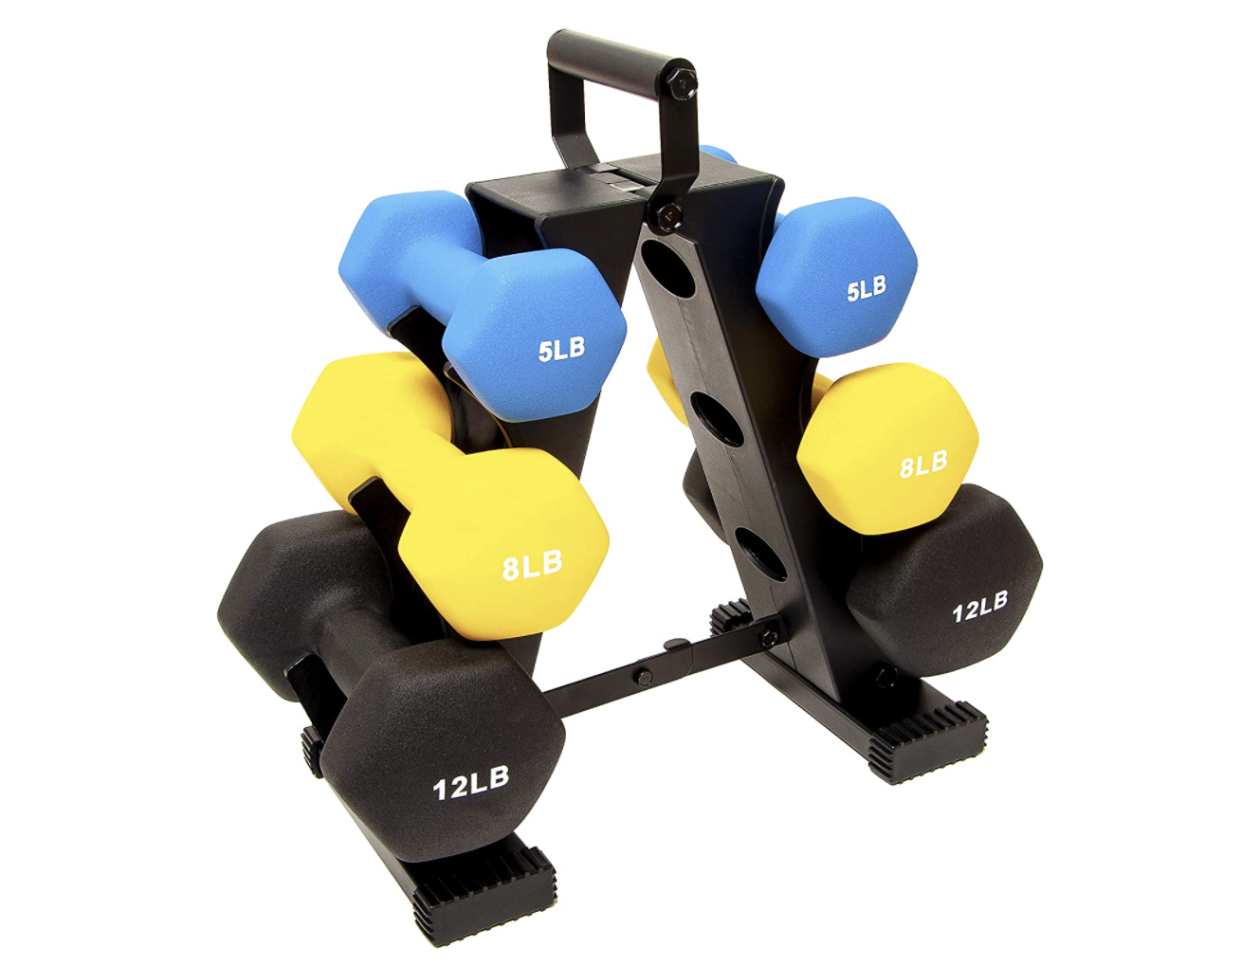 Blue, yellow and black weights in a stand.